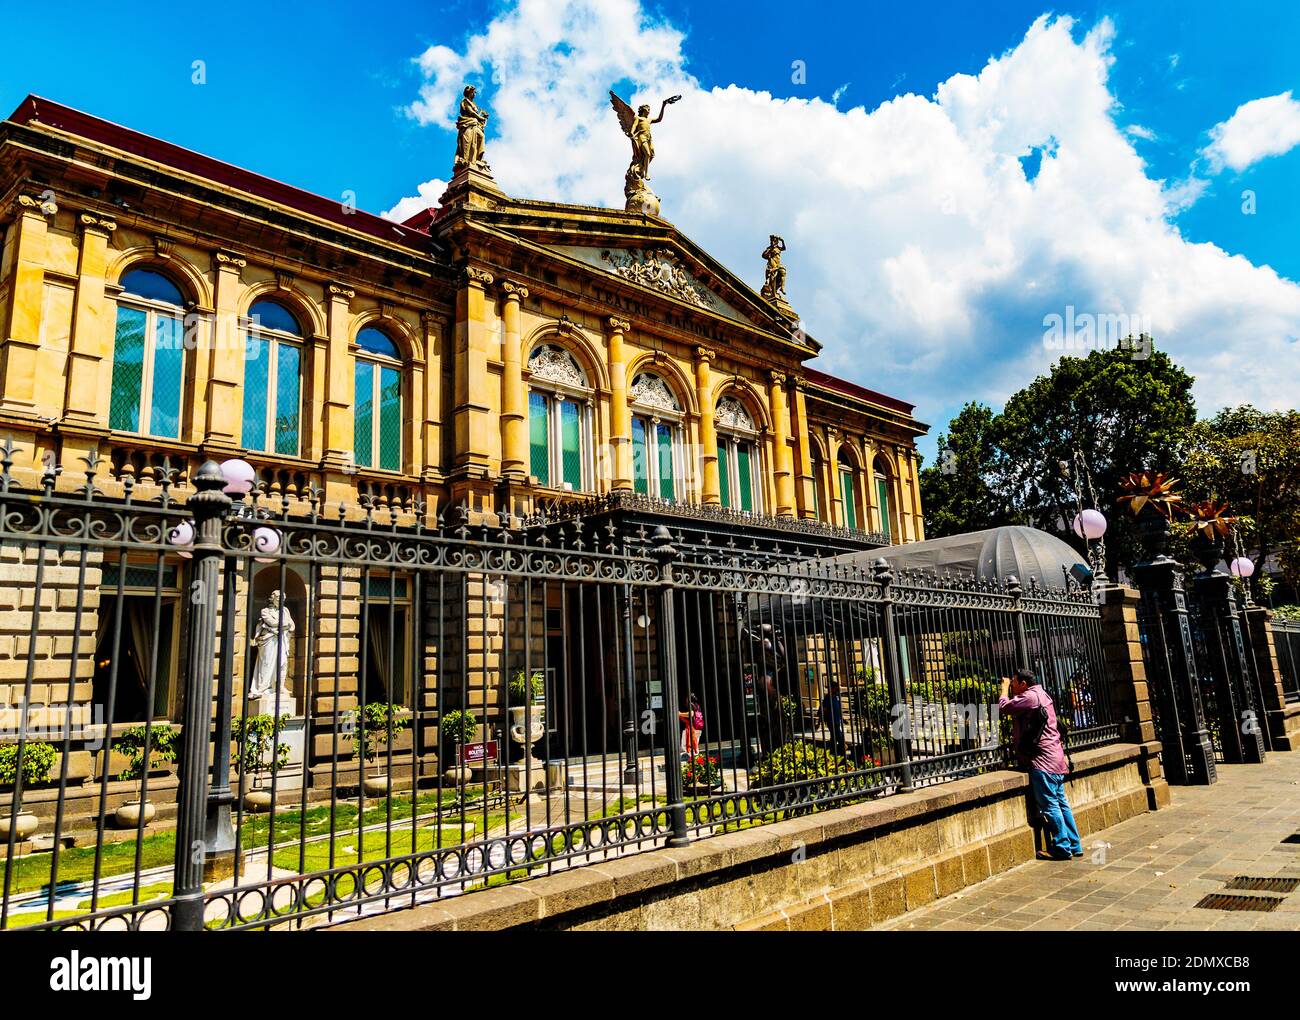 San Jose, Costa Rica - March 31, 2017:  The National Theatre of Costa Rica (Teatro Nacional de Costa Rica) is located in the central section of San Jo Stock Photo